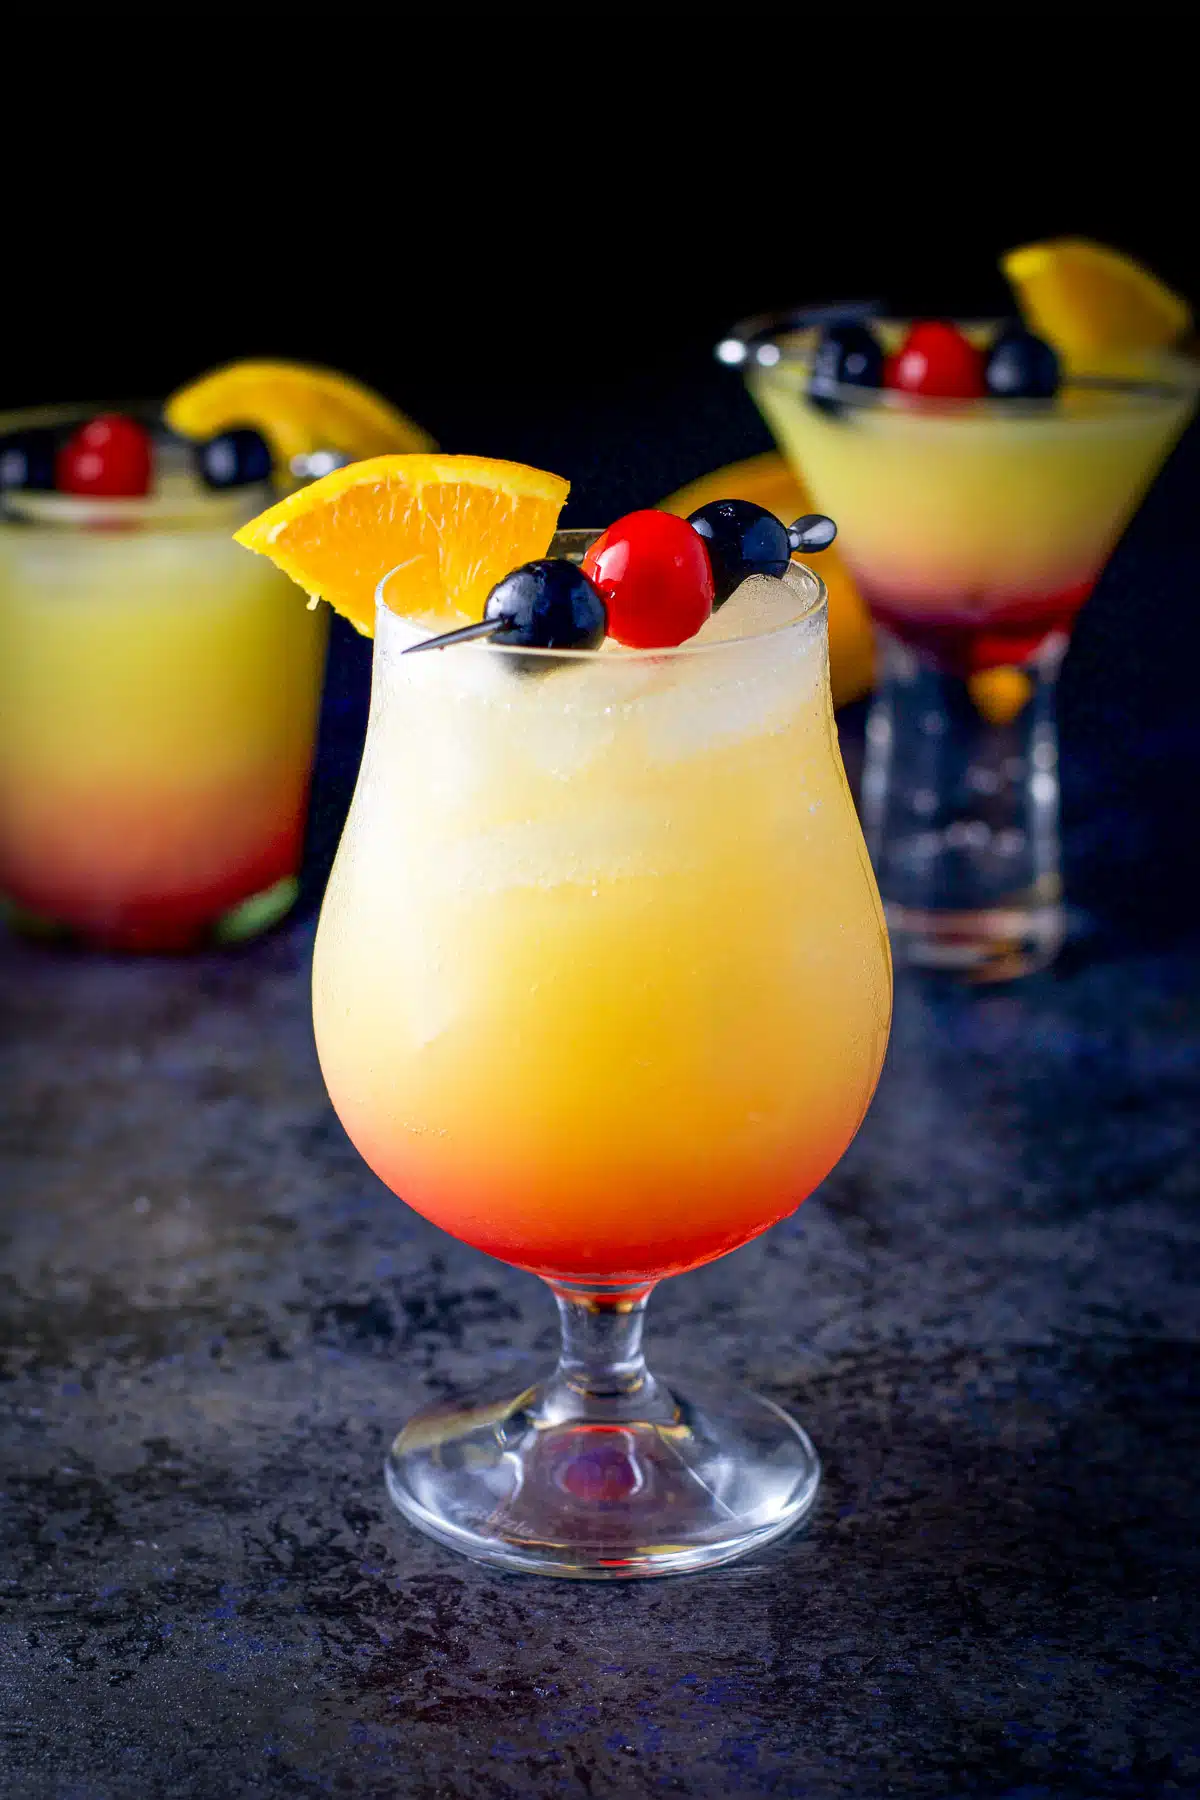 A tulip glass is in front of two other glasses filled with the tequila sunrise cocktail with cherries and orange wedges